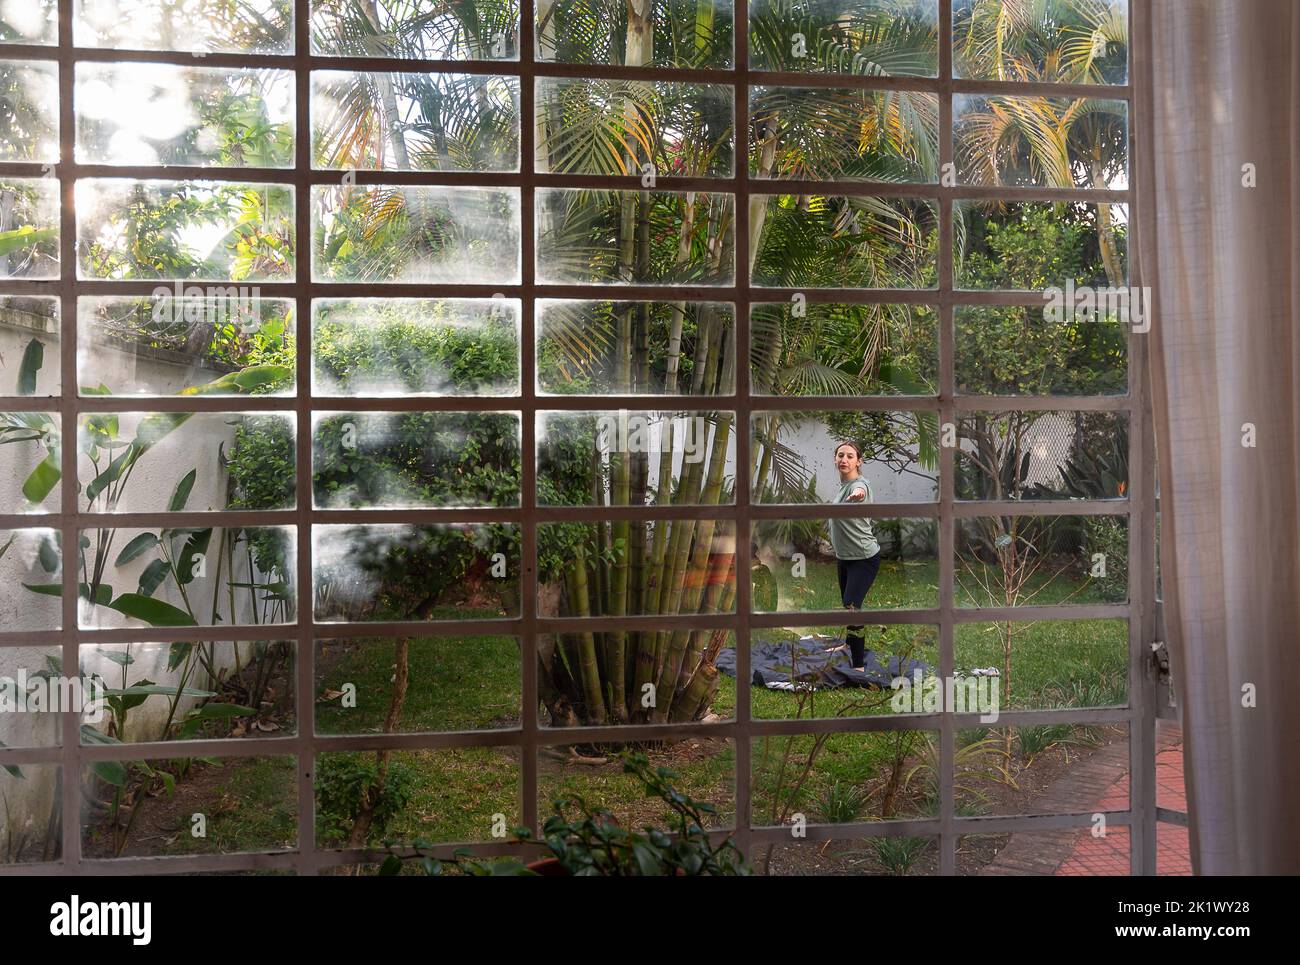 Woman practice yoga in the backyard surrounded by plants and trees, captured through the window of the house with tropical vibes and palm trees Stock Photo